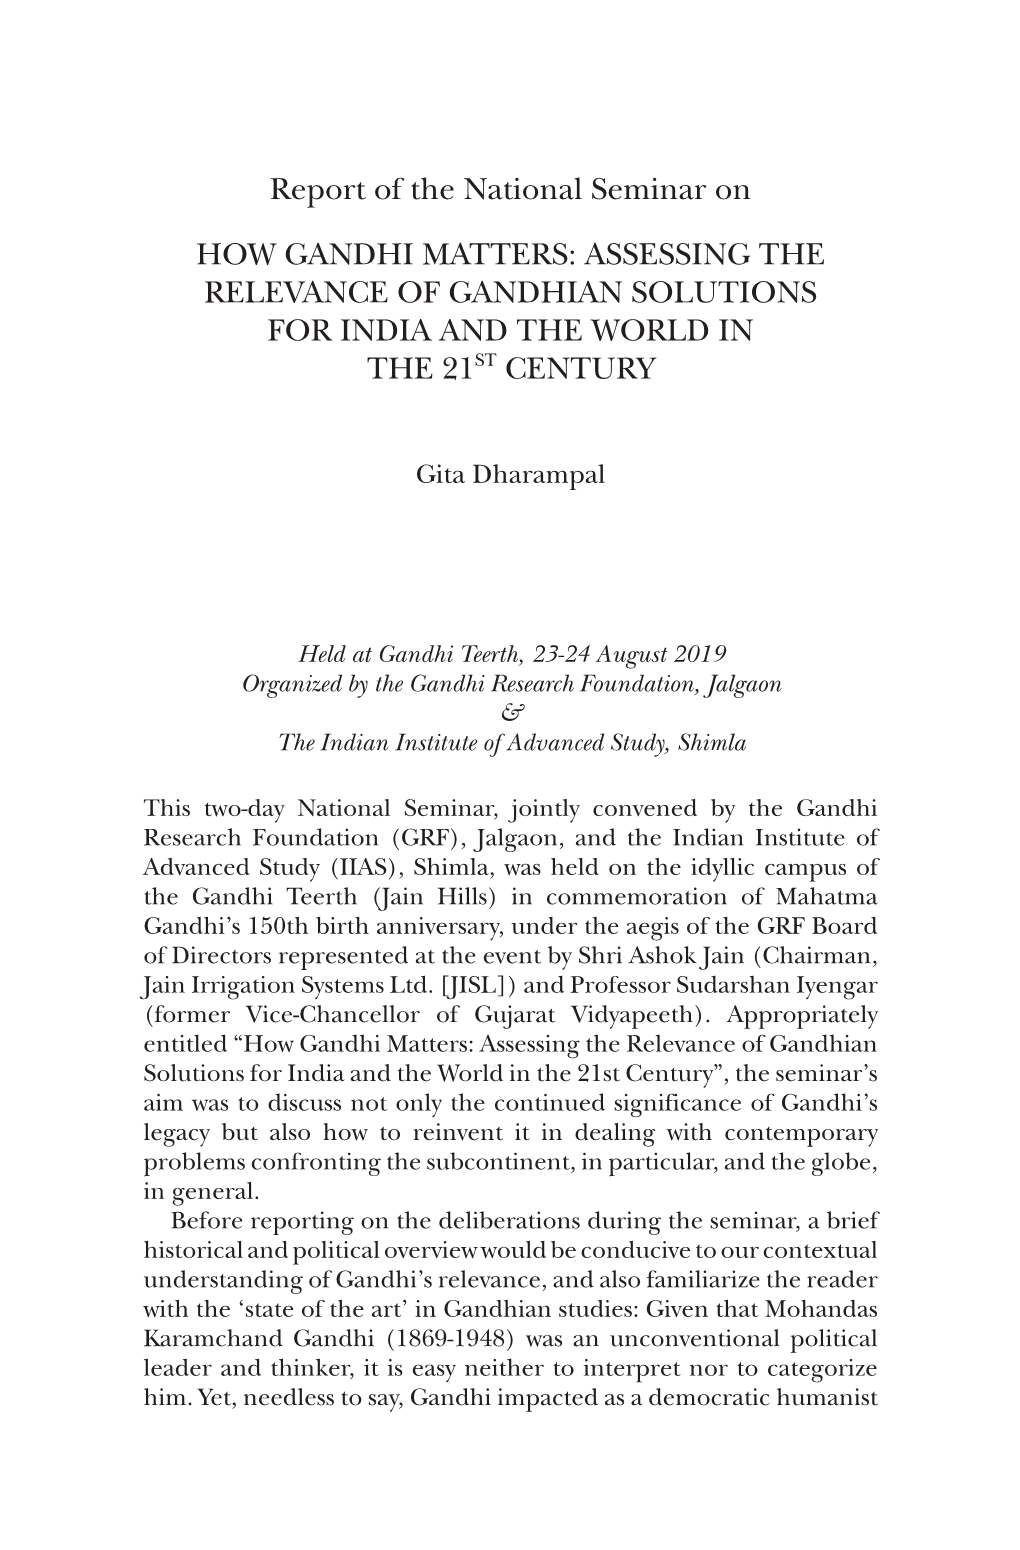 Report of the National Seminar on HOW GANDHI MATTERS